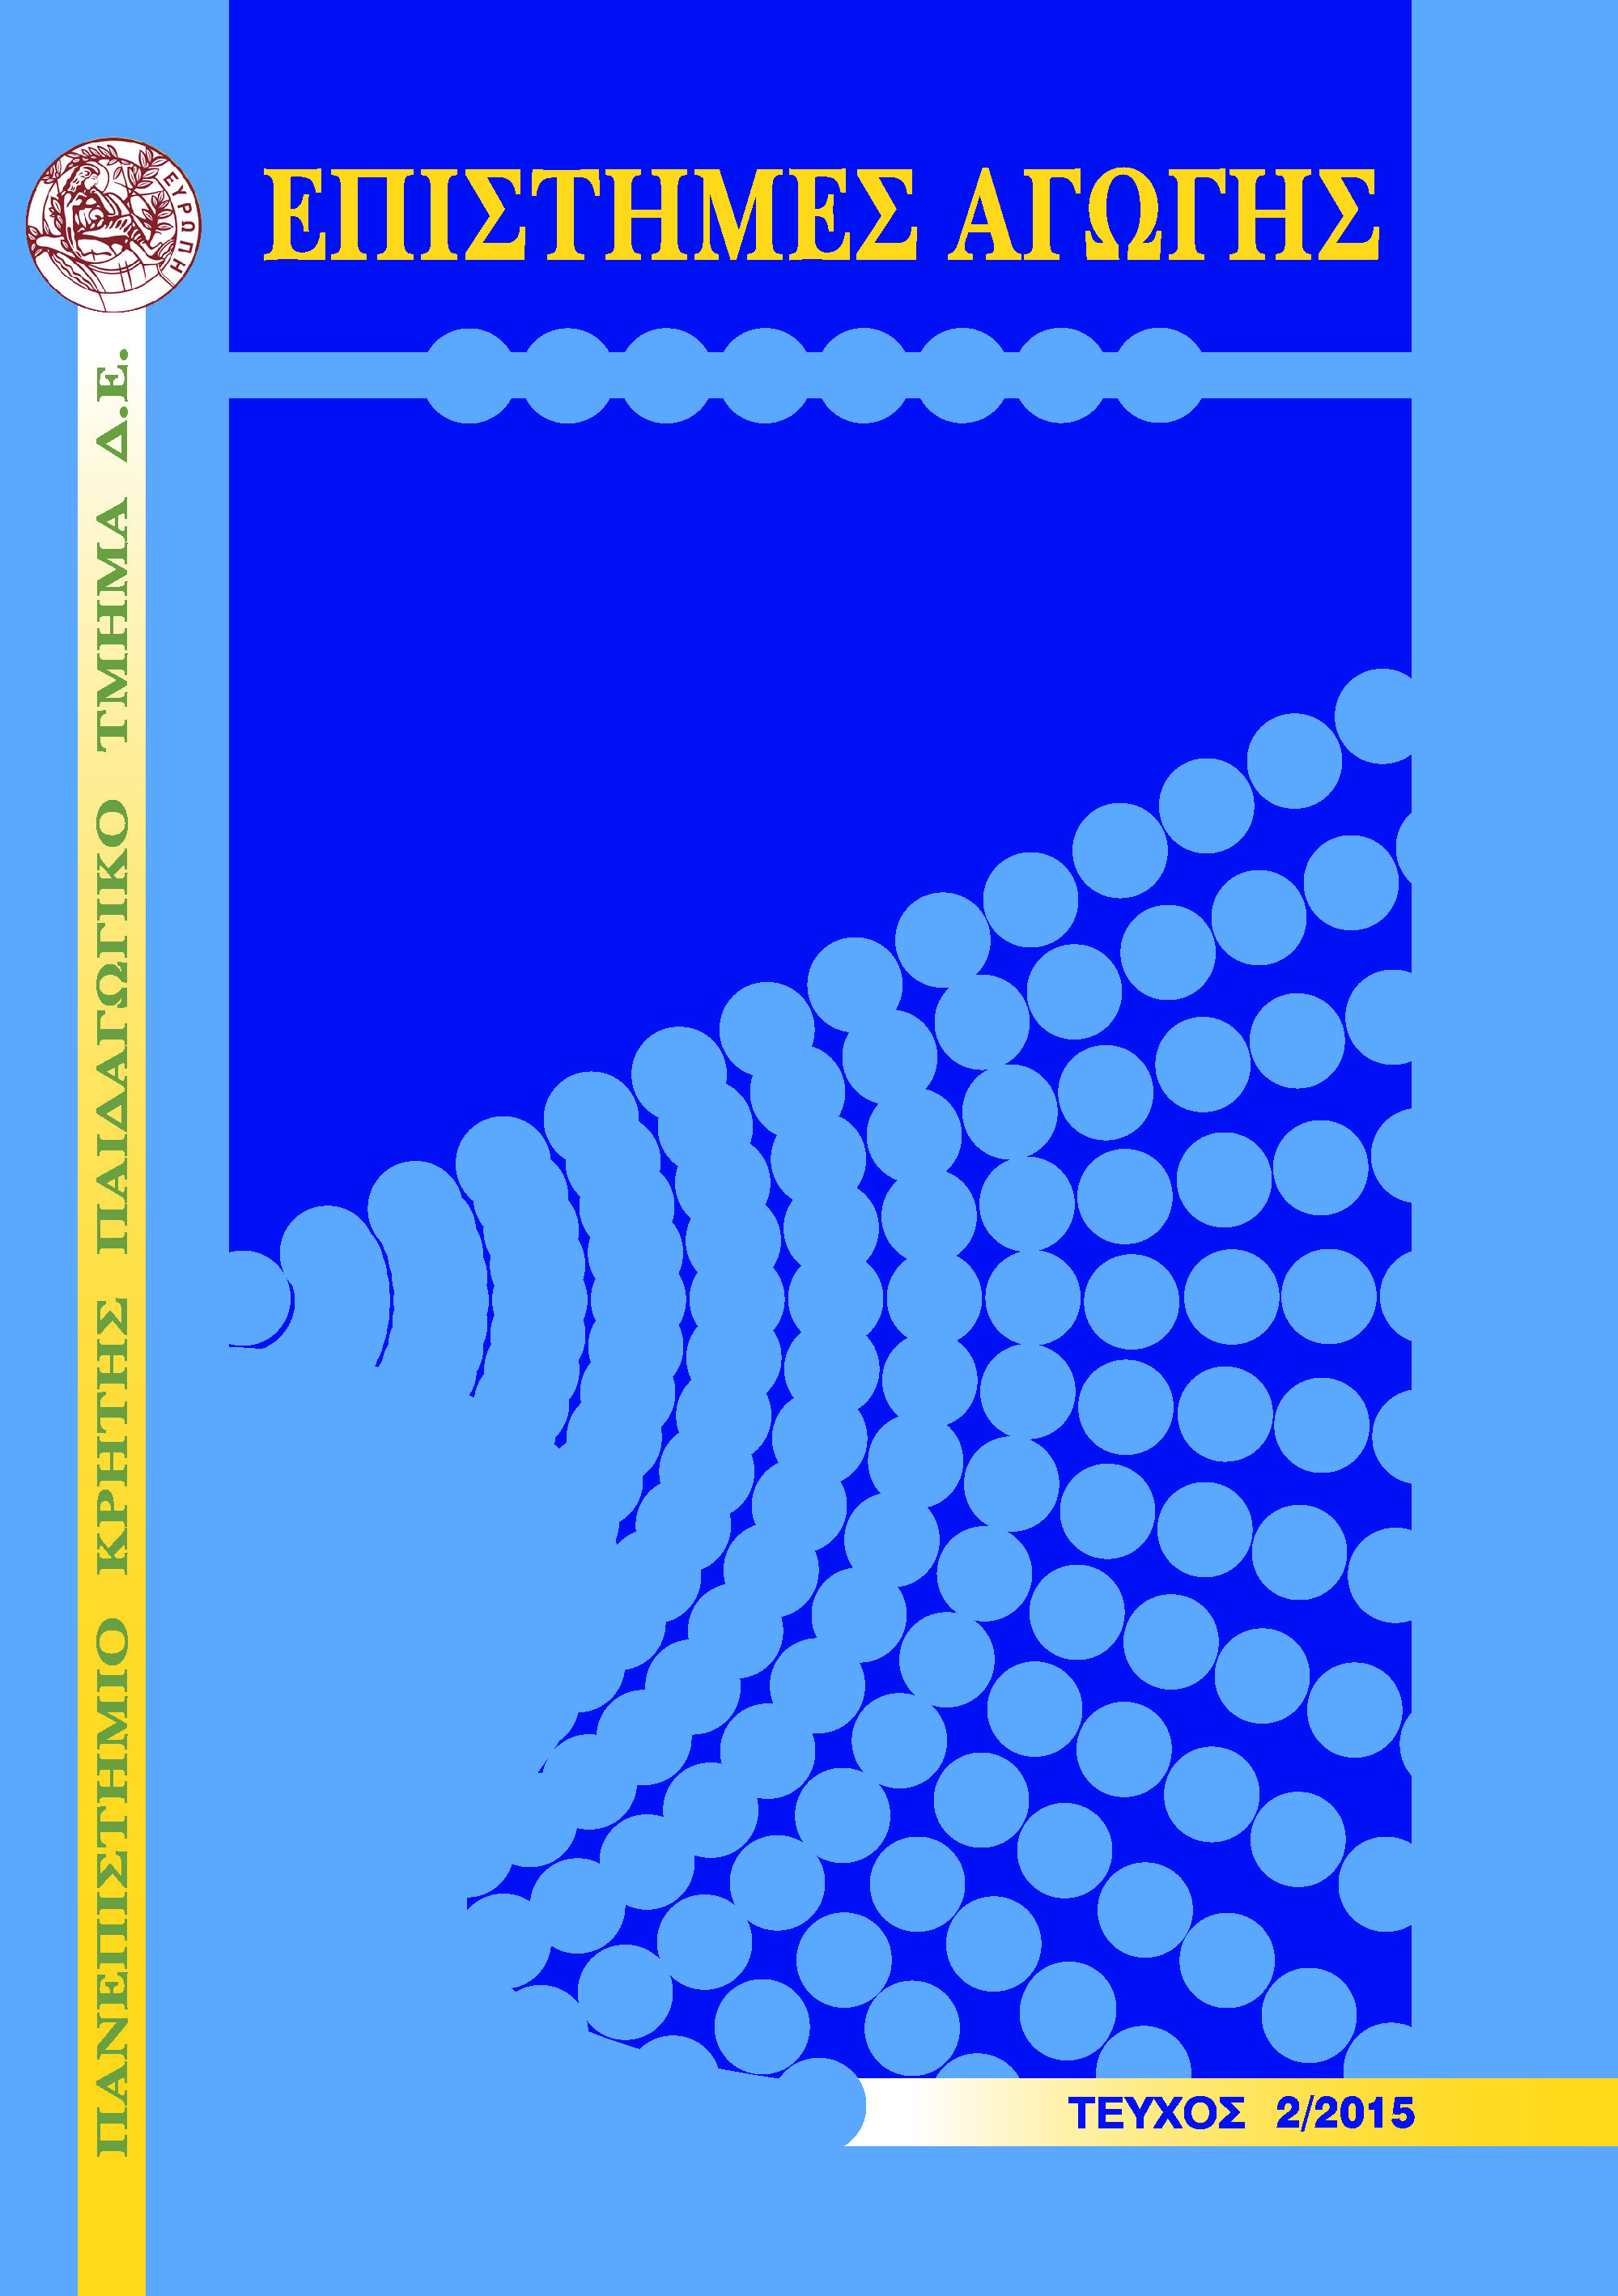 Education Sciences 2015, Issue 2 COVER